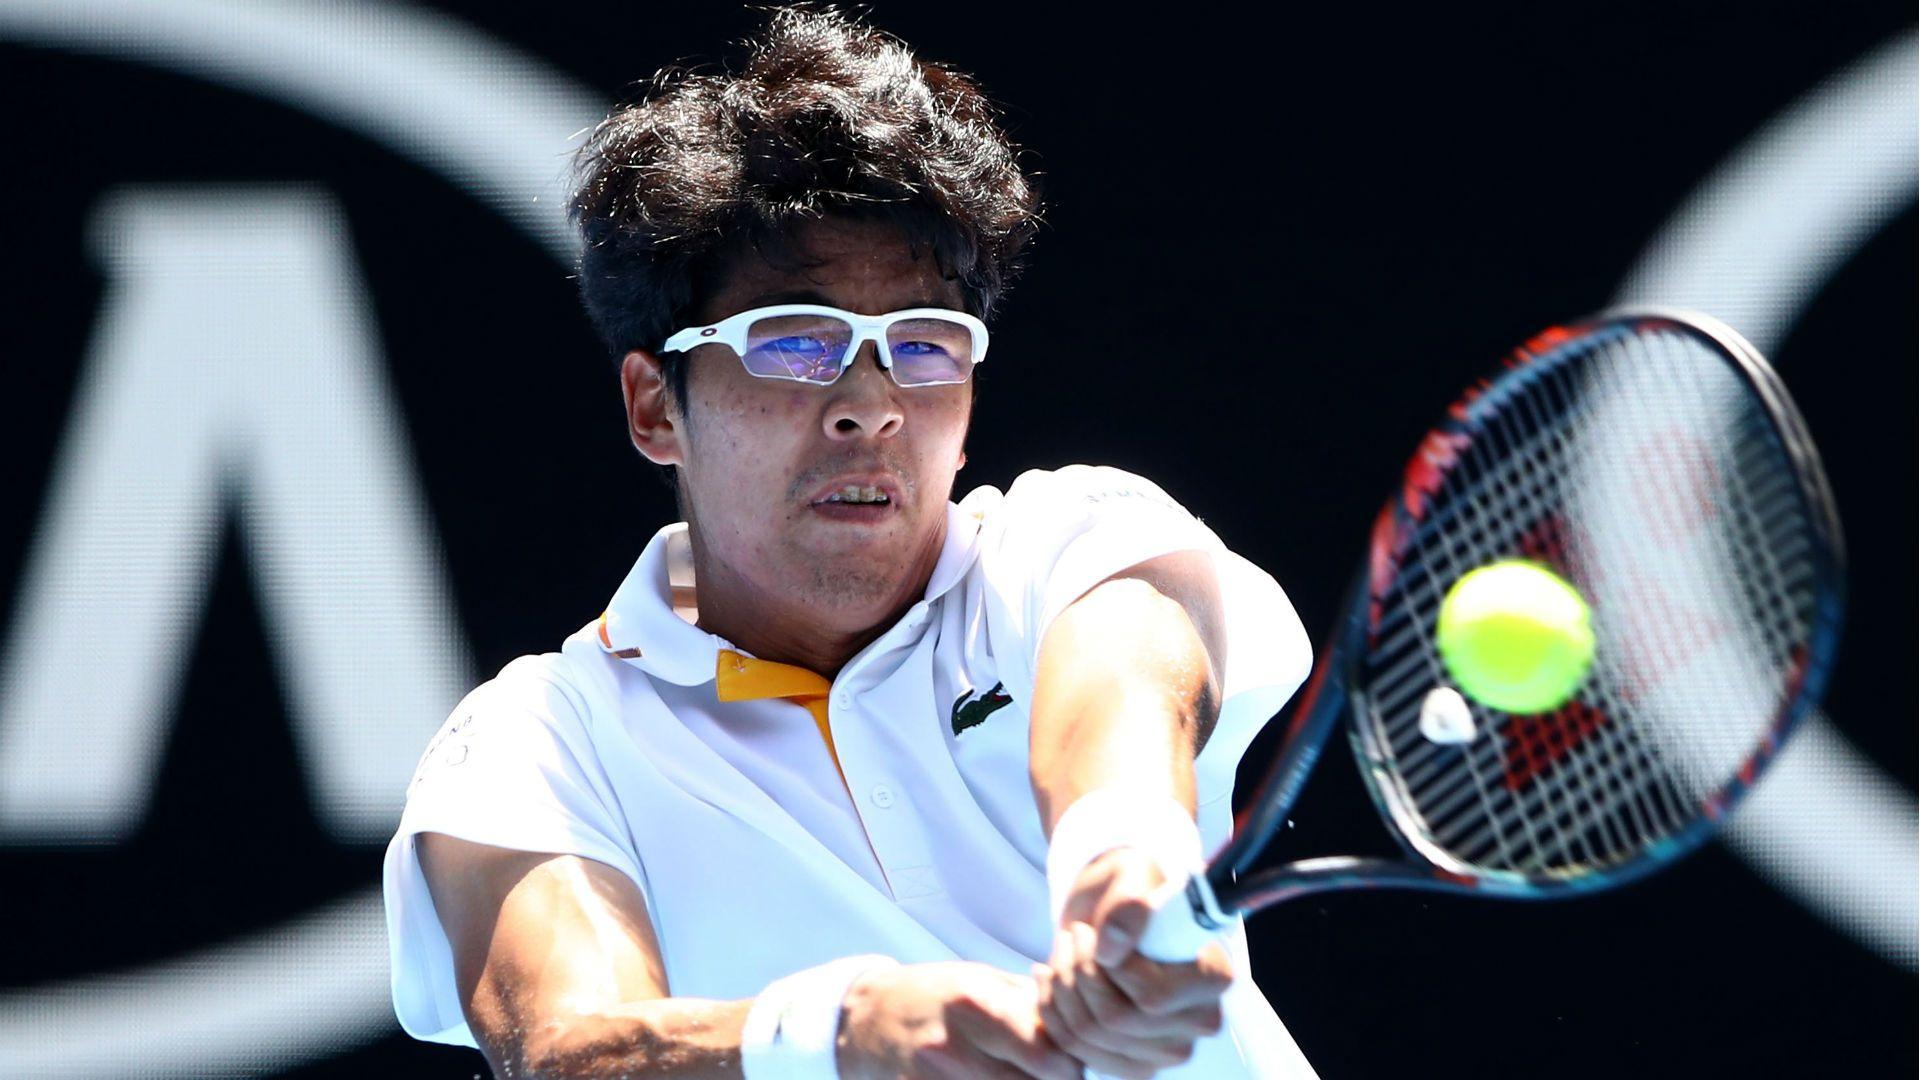 Why does Hyeon Chung wear glasses?